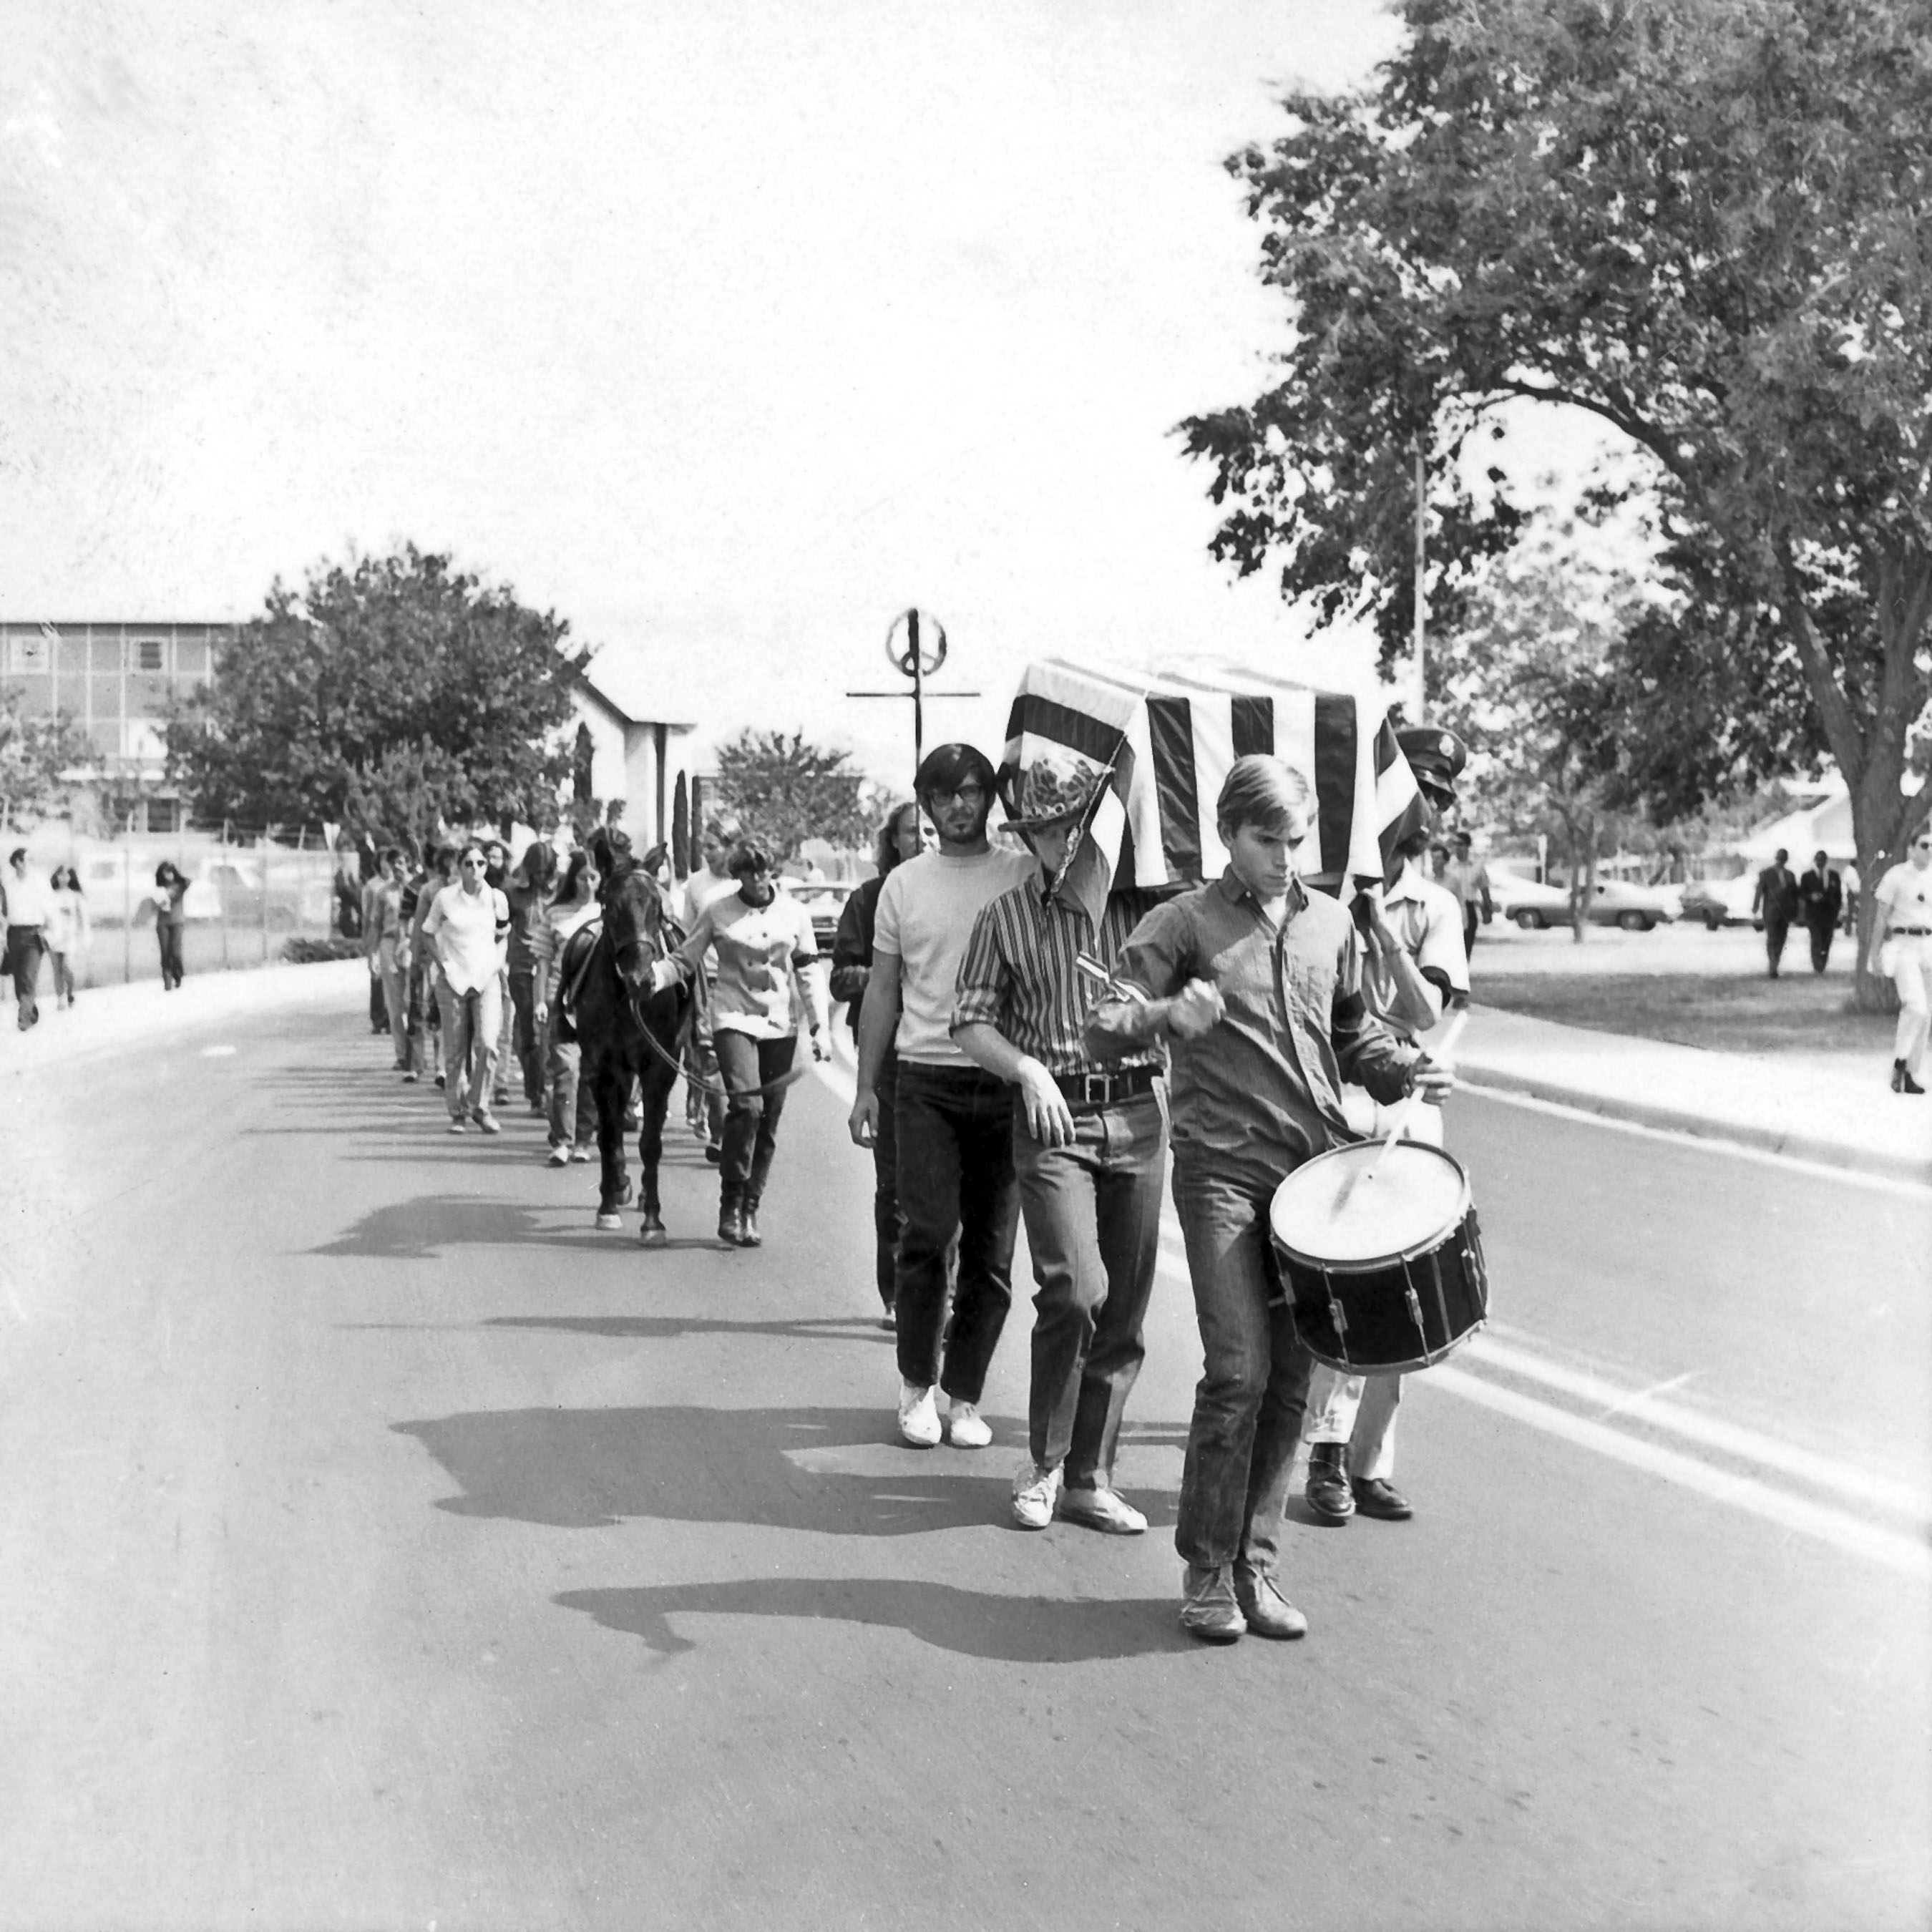 Anti-war protestors marching on the NMSU campus